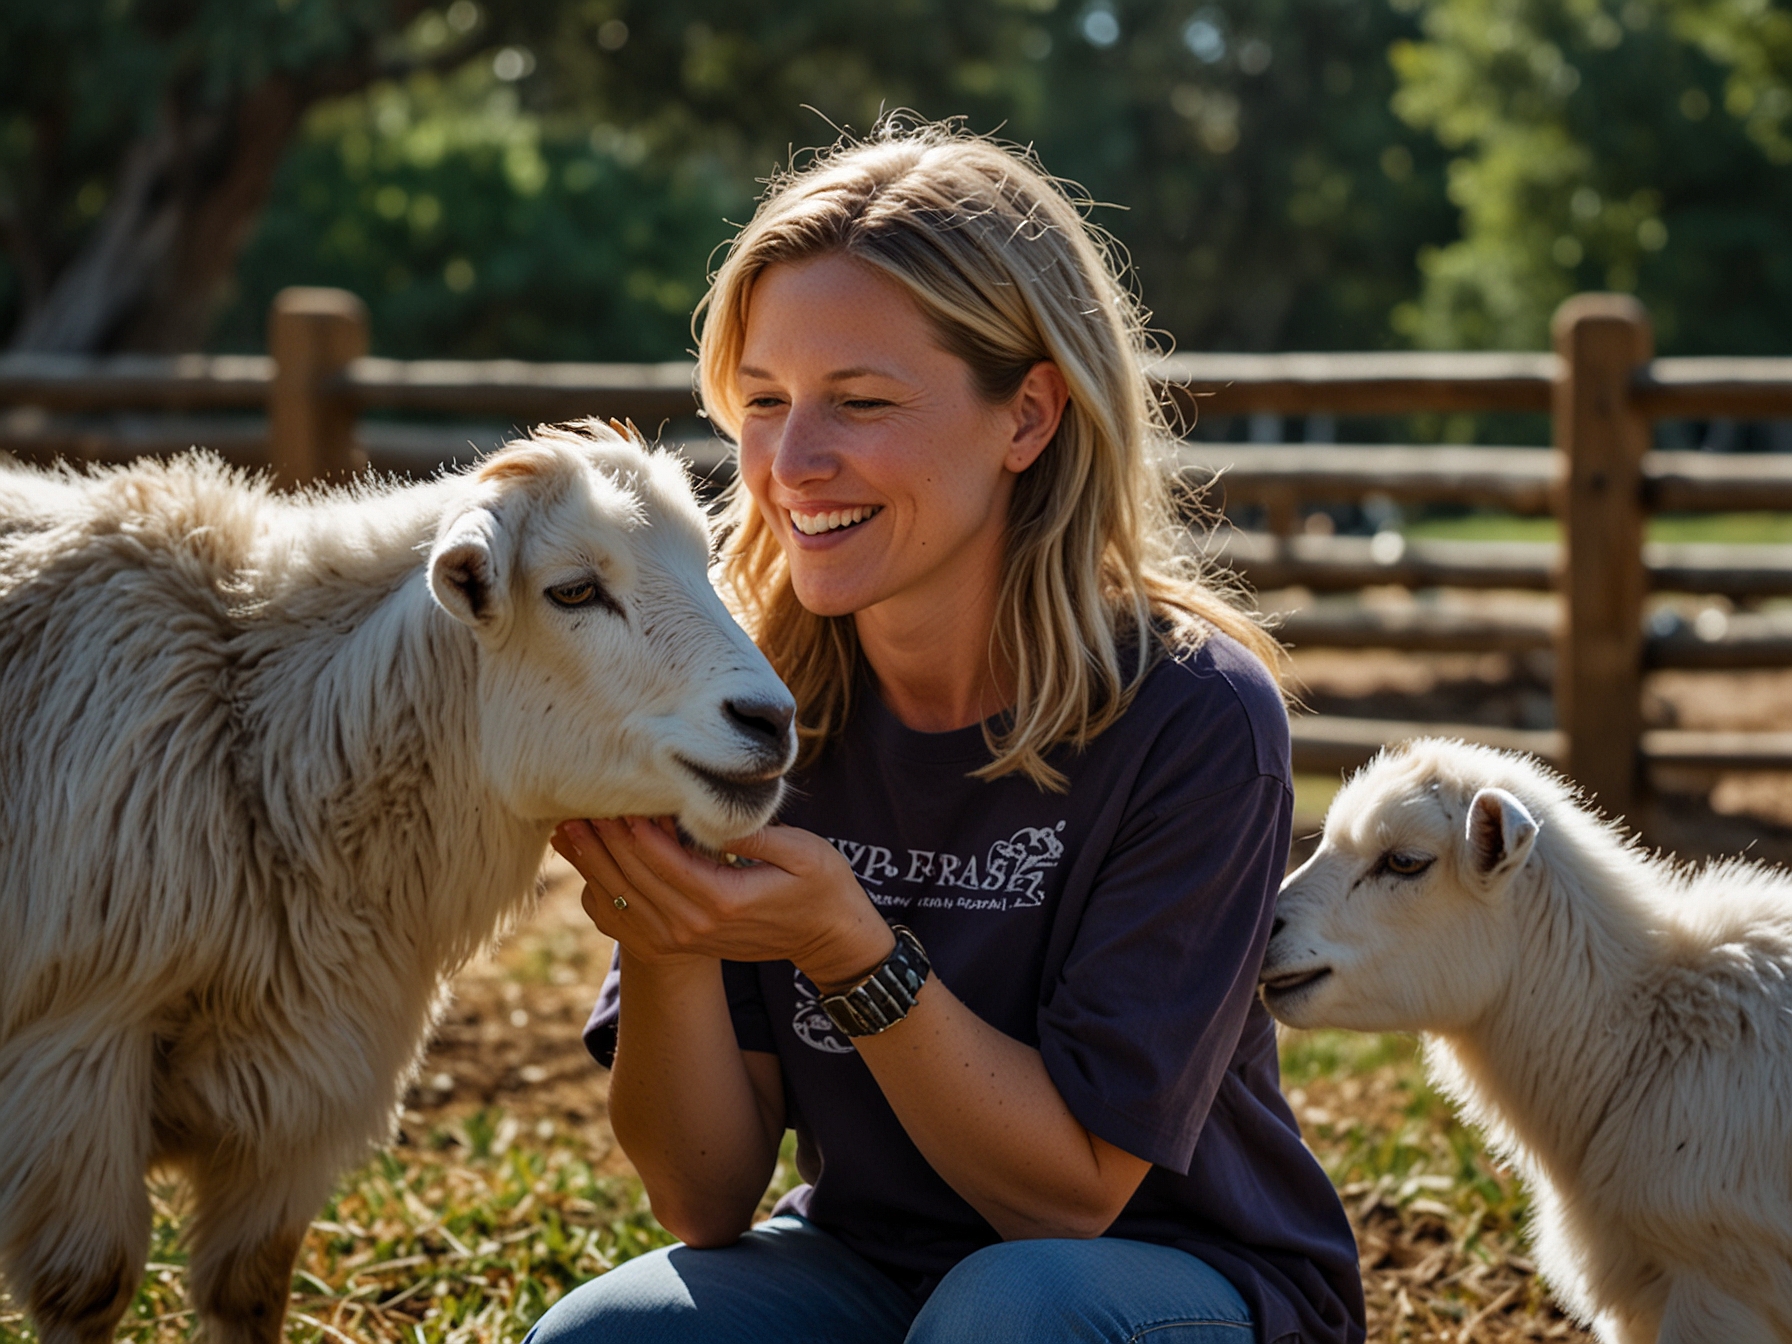 Tracy Stricklin enjoys petting a friendly goat at the 'Picnic with Goats' event at Cajun Corral Farm. The event allows visitors to connect with nature and experience the peaceful farm environment.